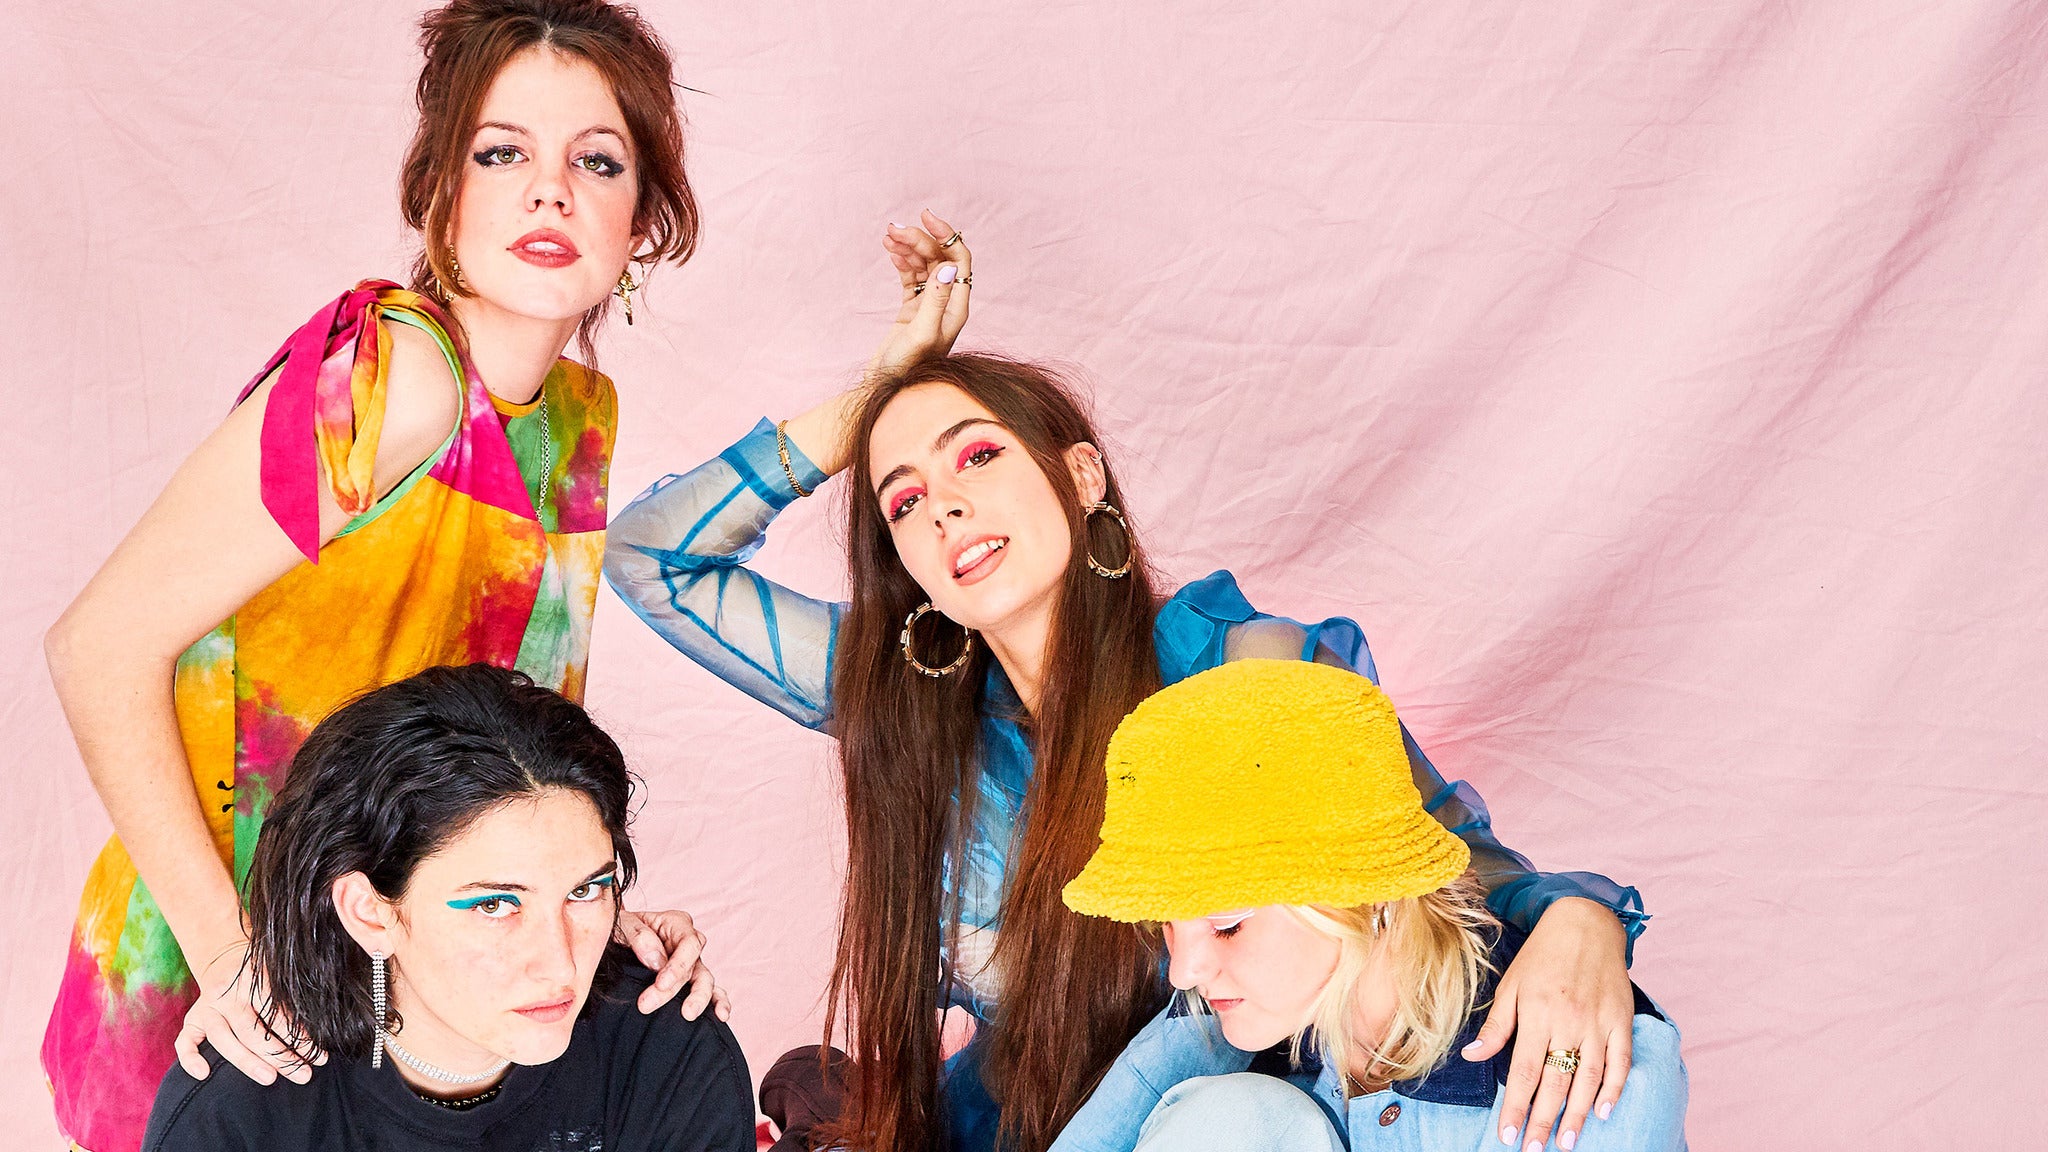 Hinds in Seattle promo photo for Artist presale offer code